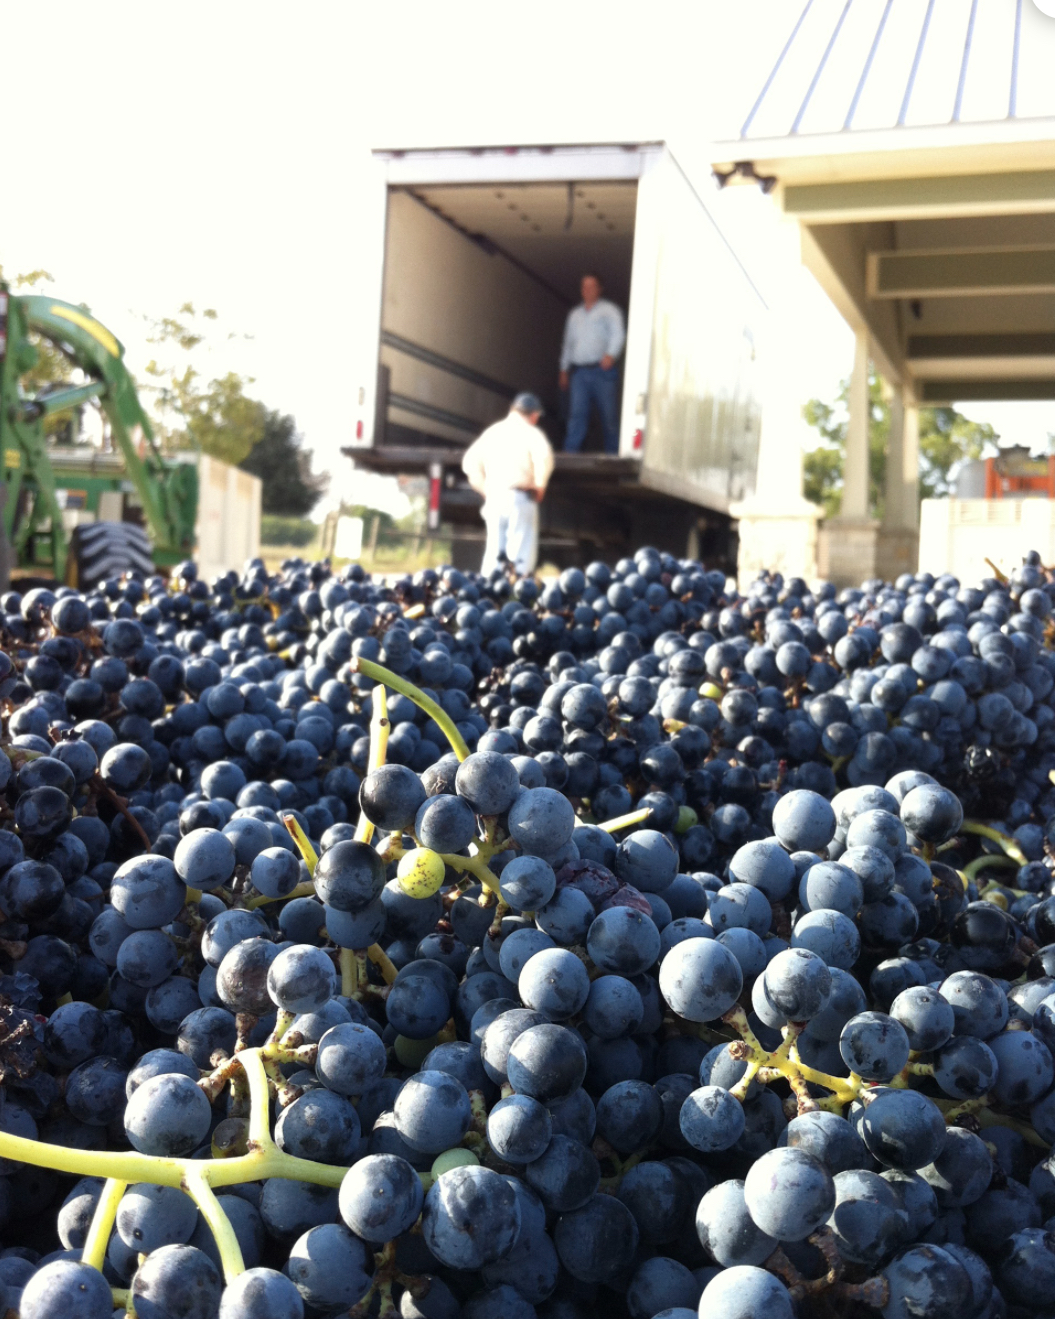 A bunch of grapes and two men in the background are about to load the grapes into the truck.